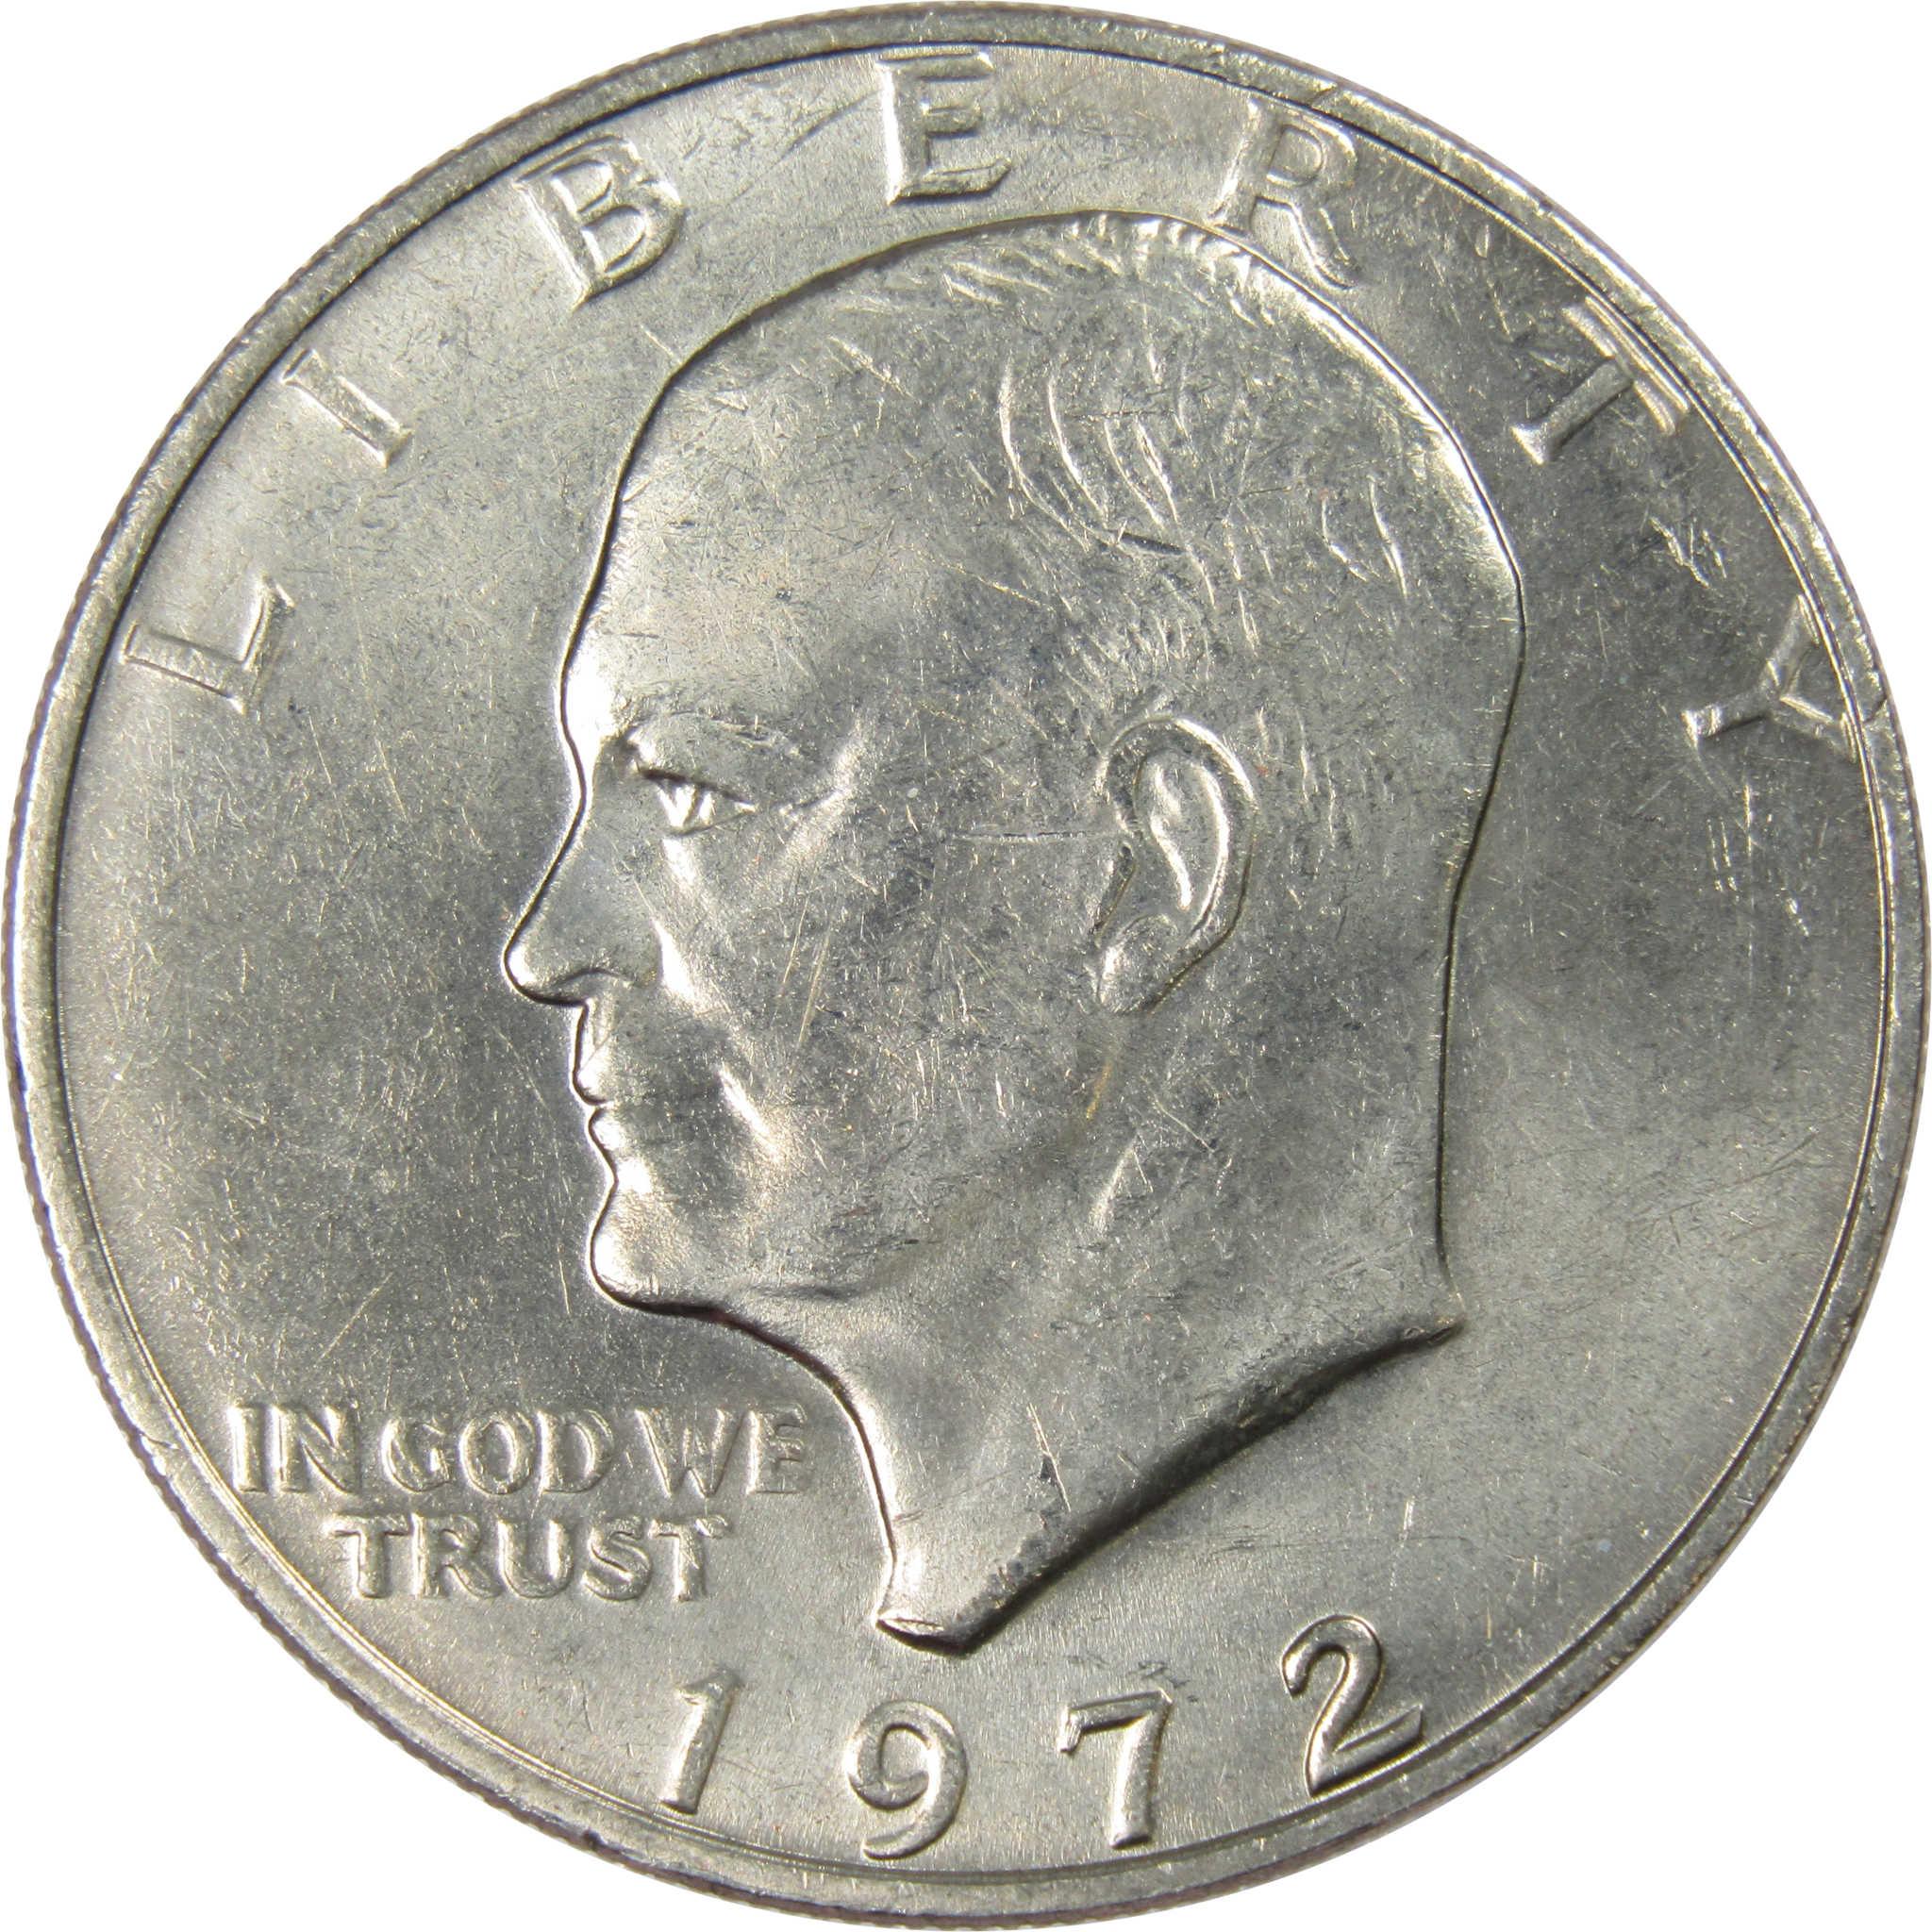 1972 Eisenhower Dollar BU Uncirculated Mint State Clad IKE $1 US Coin